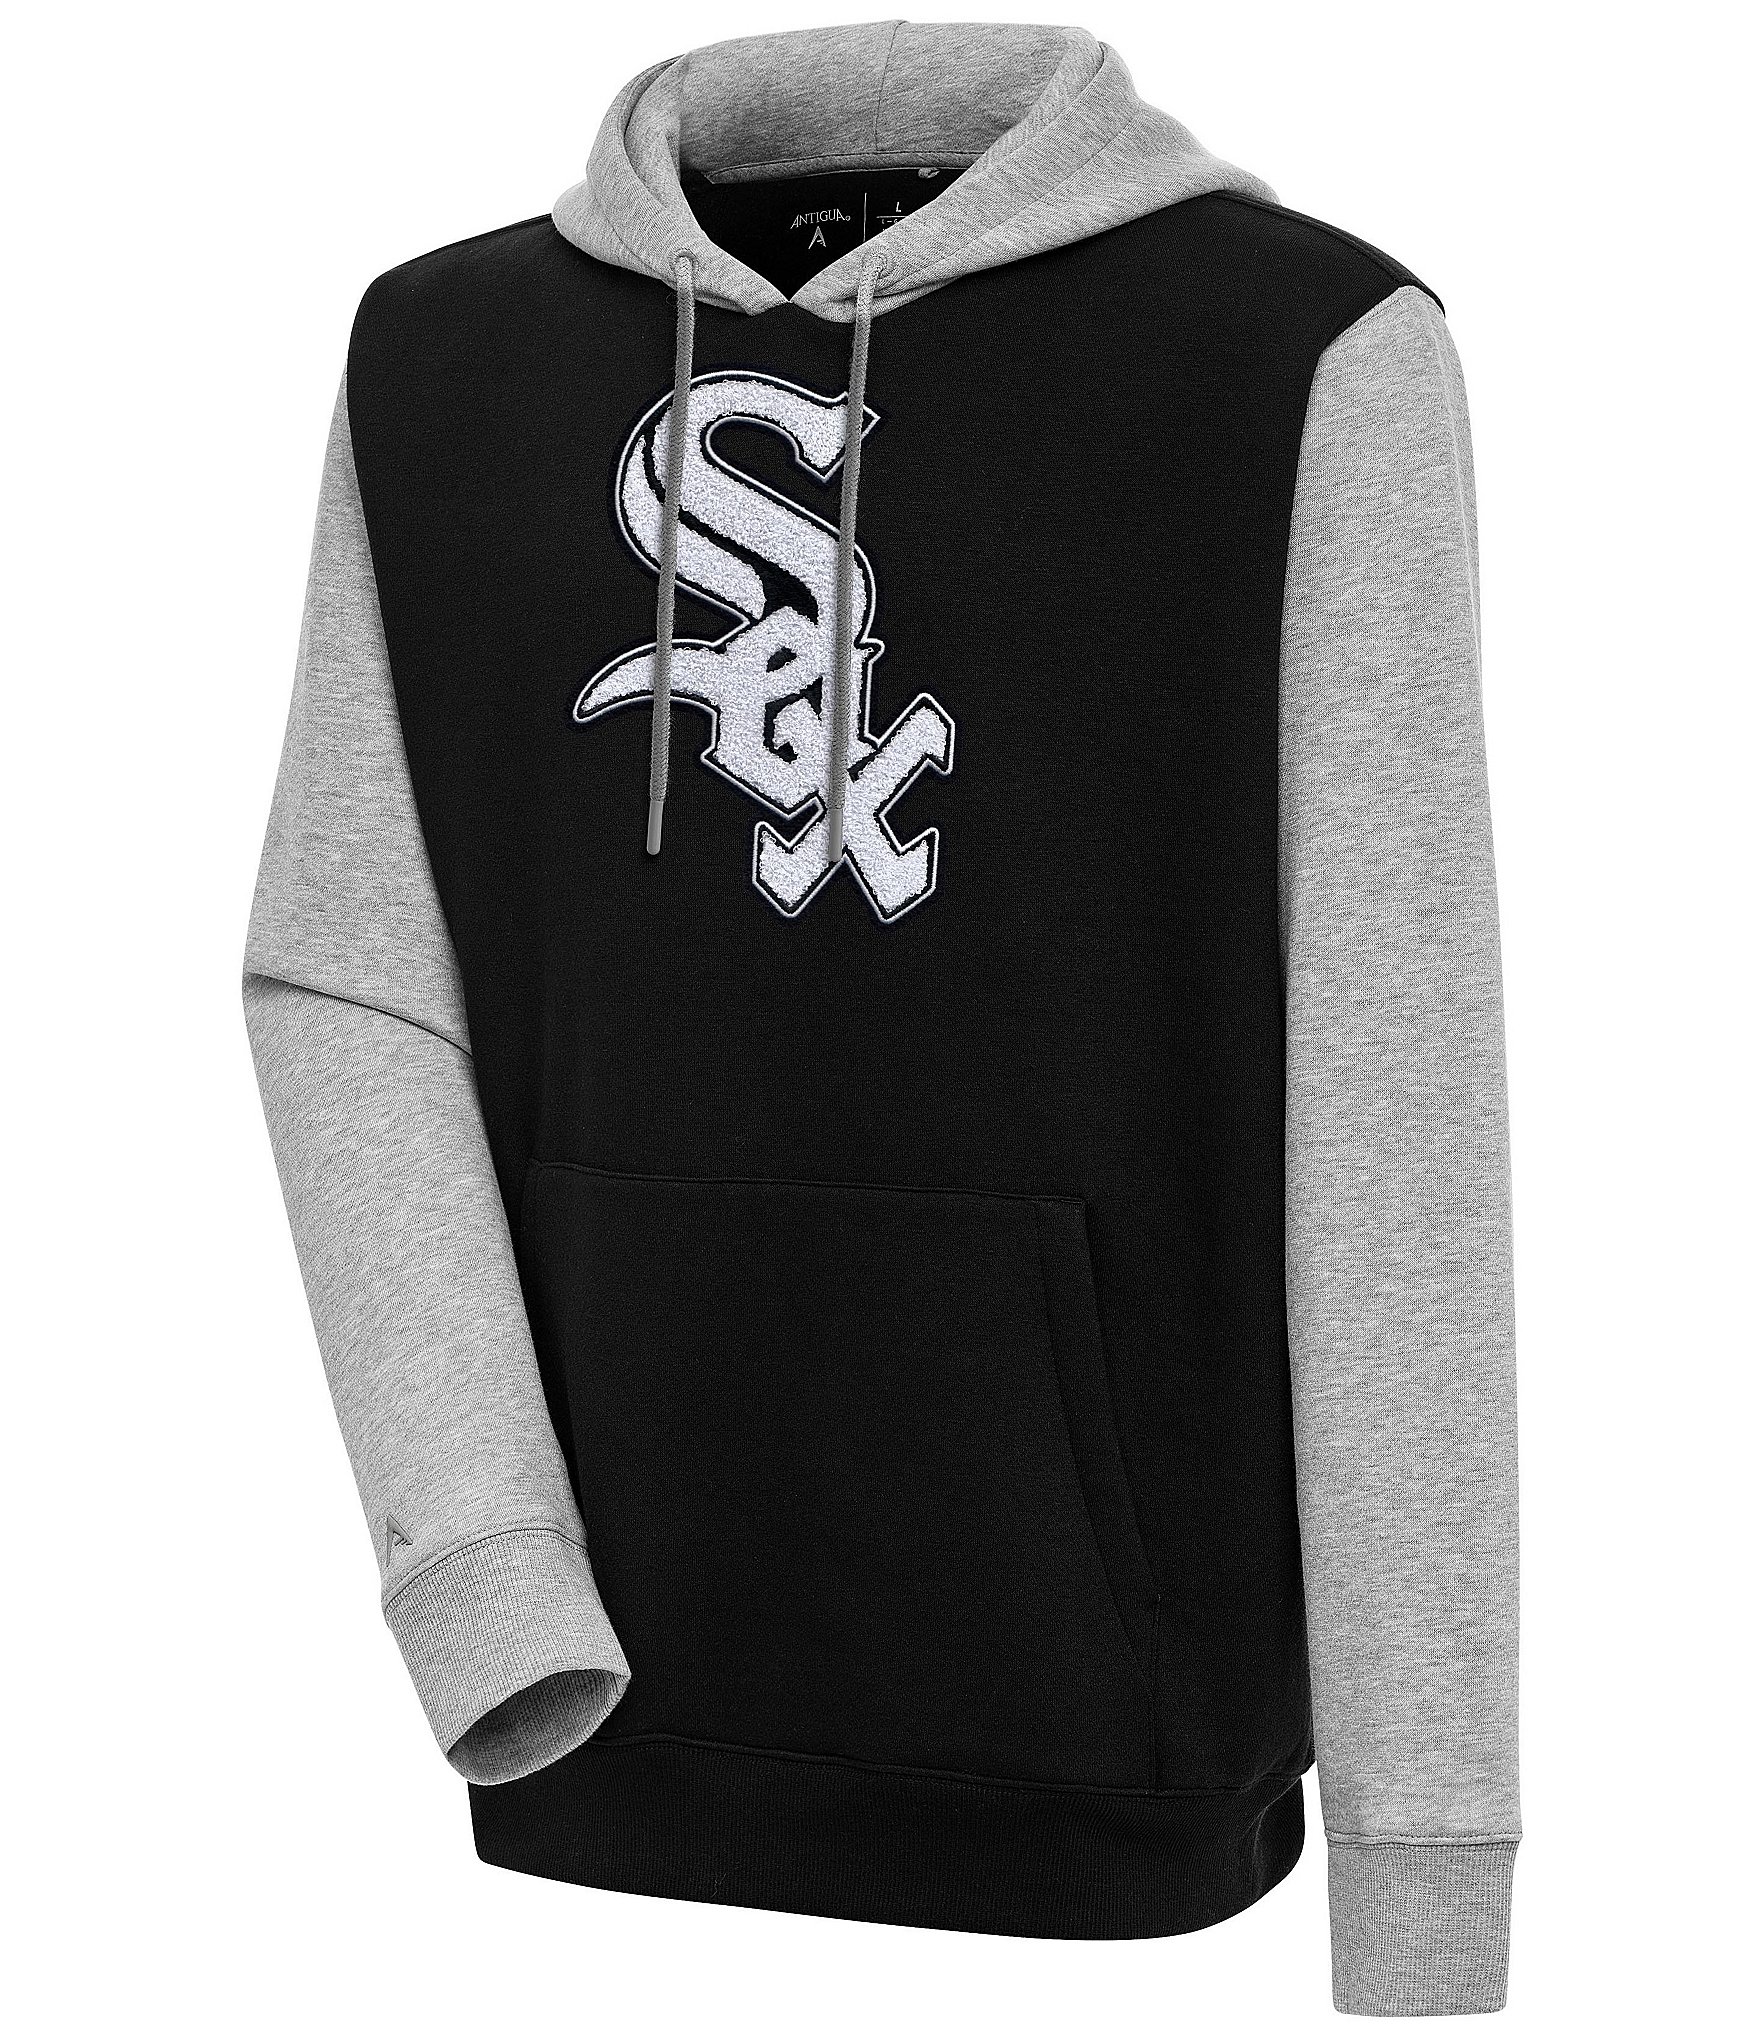 Antigua MLB Chenille Patch Victory Hoodie, Mens, XL, Chicago White Sox Black/Grey